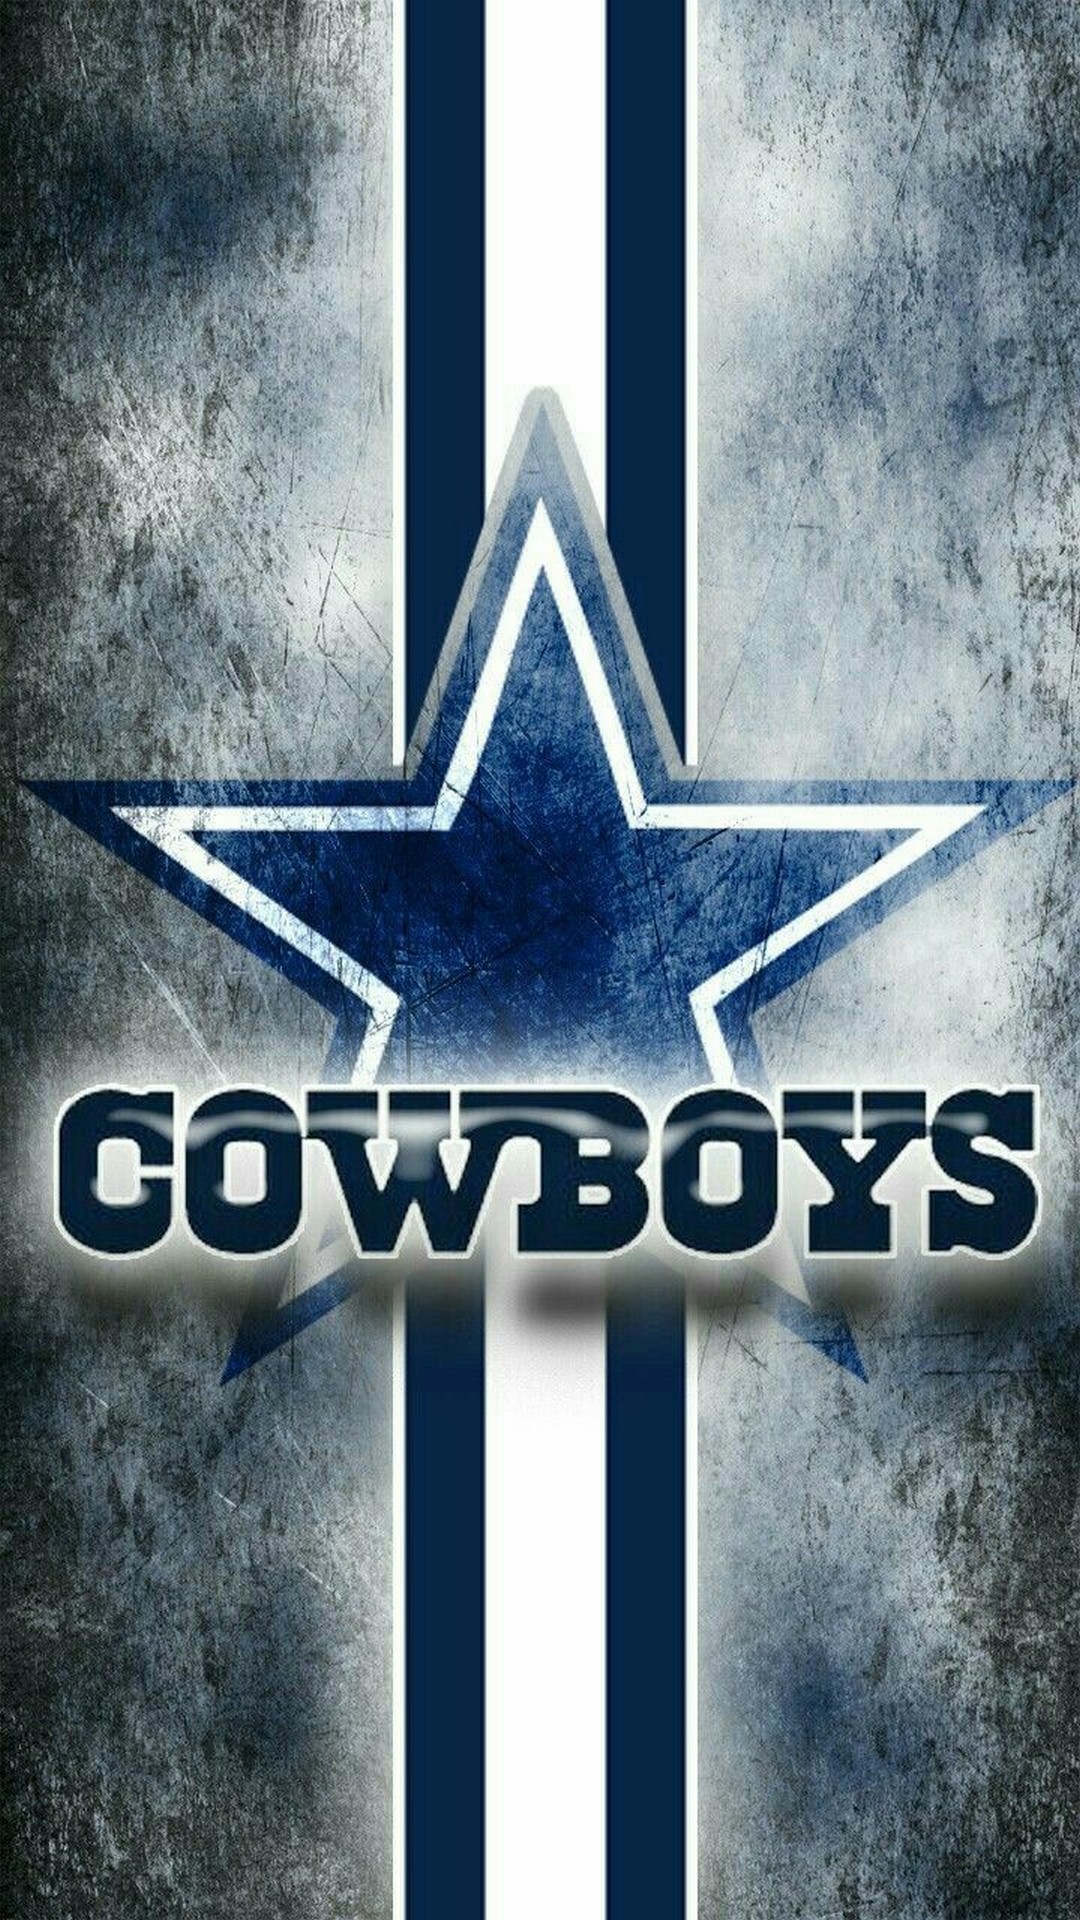 Dallas Cowboys iPhone 8 Plus Wallpaper with high-resolution 1080x1920 pixel. Download and set as wallpaper for Apple iPhone X, XS Max, XR, 8, 7, 6, SE, iPad, Android